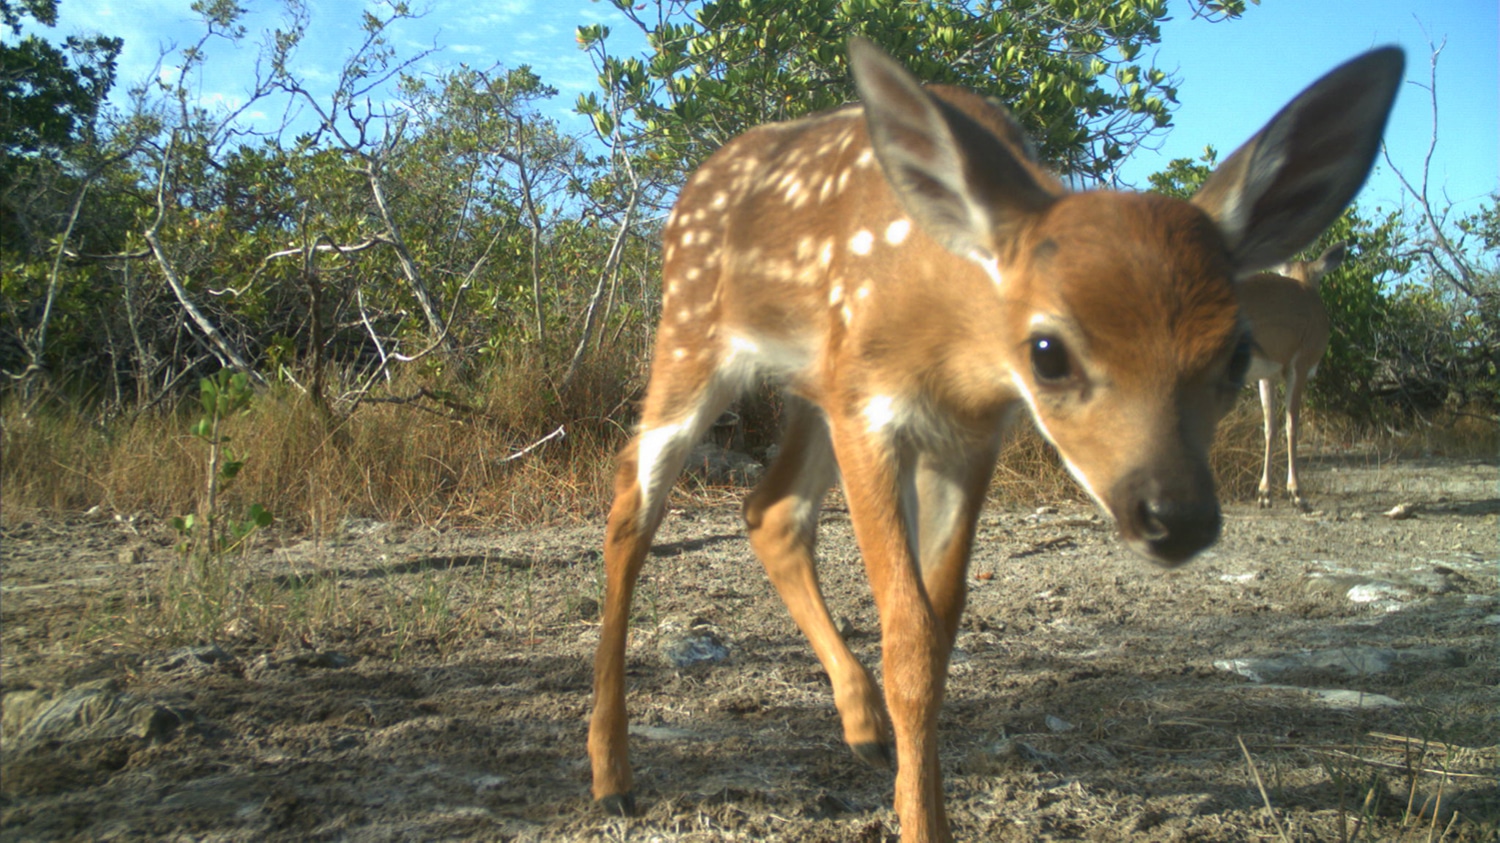 A Key deer photo approaches a camera trap in the Florida Keys.